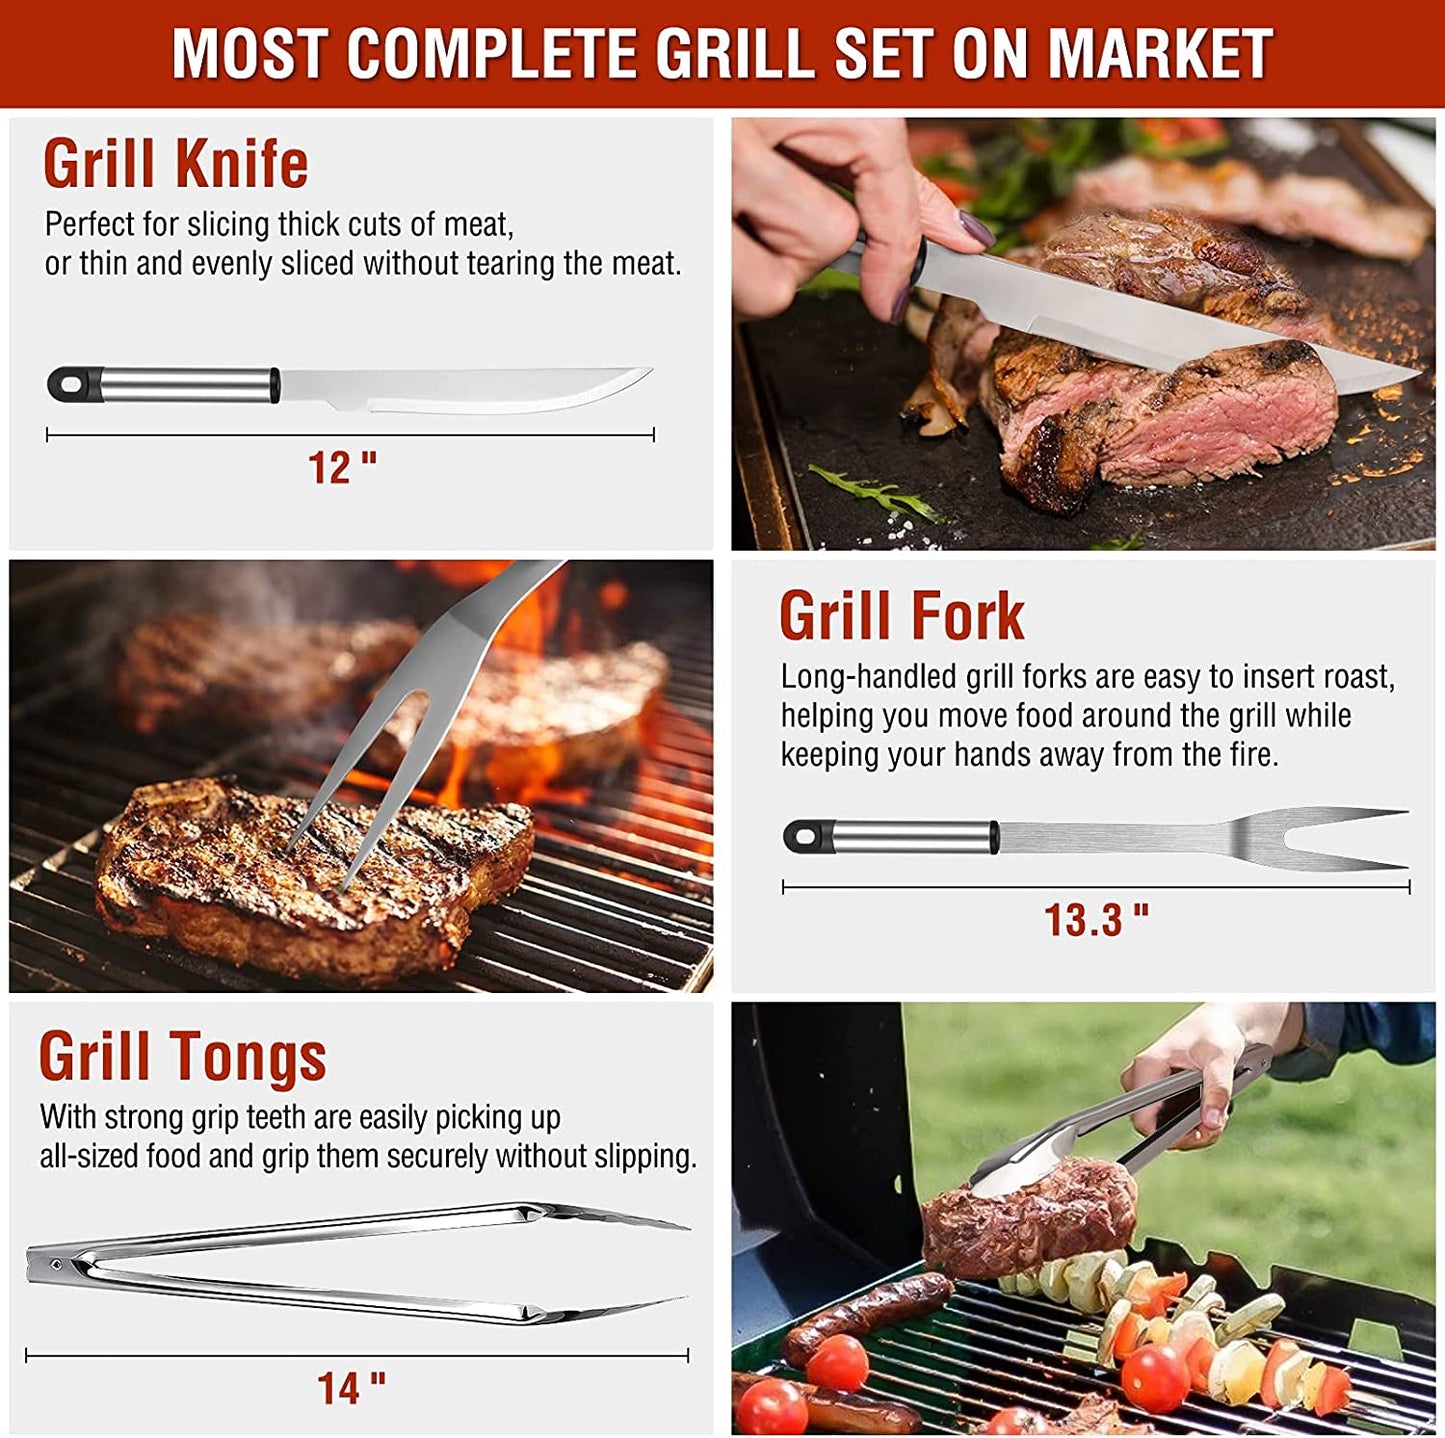 Grill Tools, BBQ Accessories, Grill Accessories, Grill Set for Outdoor Grill, Grill Utensils Stainless Steel Grilling Tools Grill Kit, 122PCS Grilling Gifts for Men Women Christmas